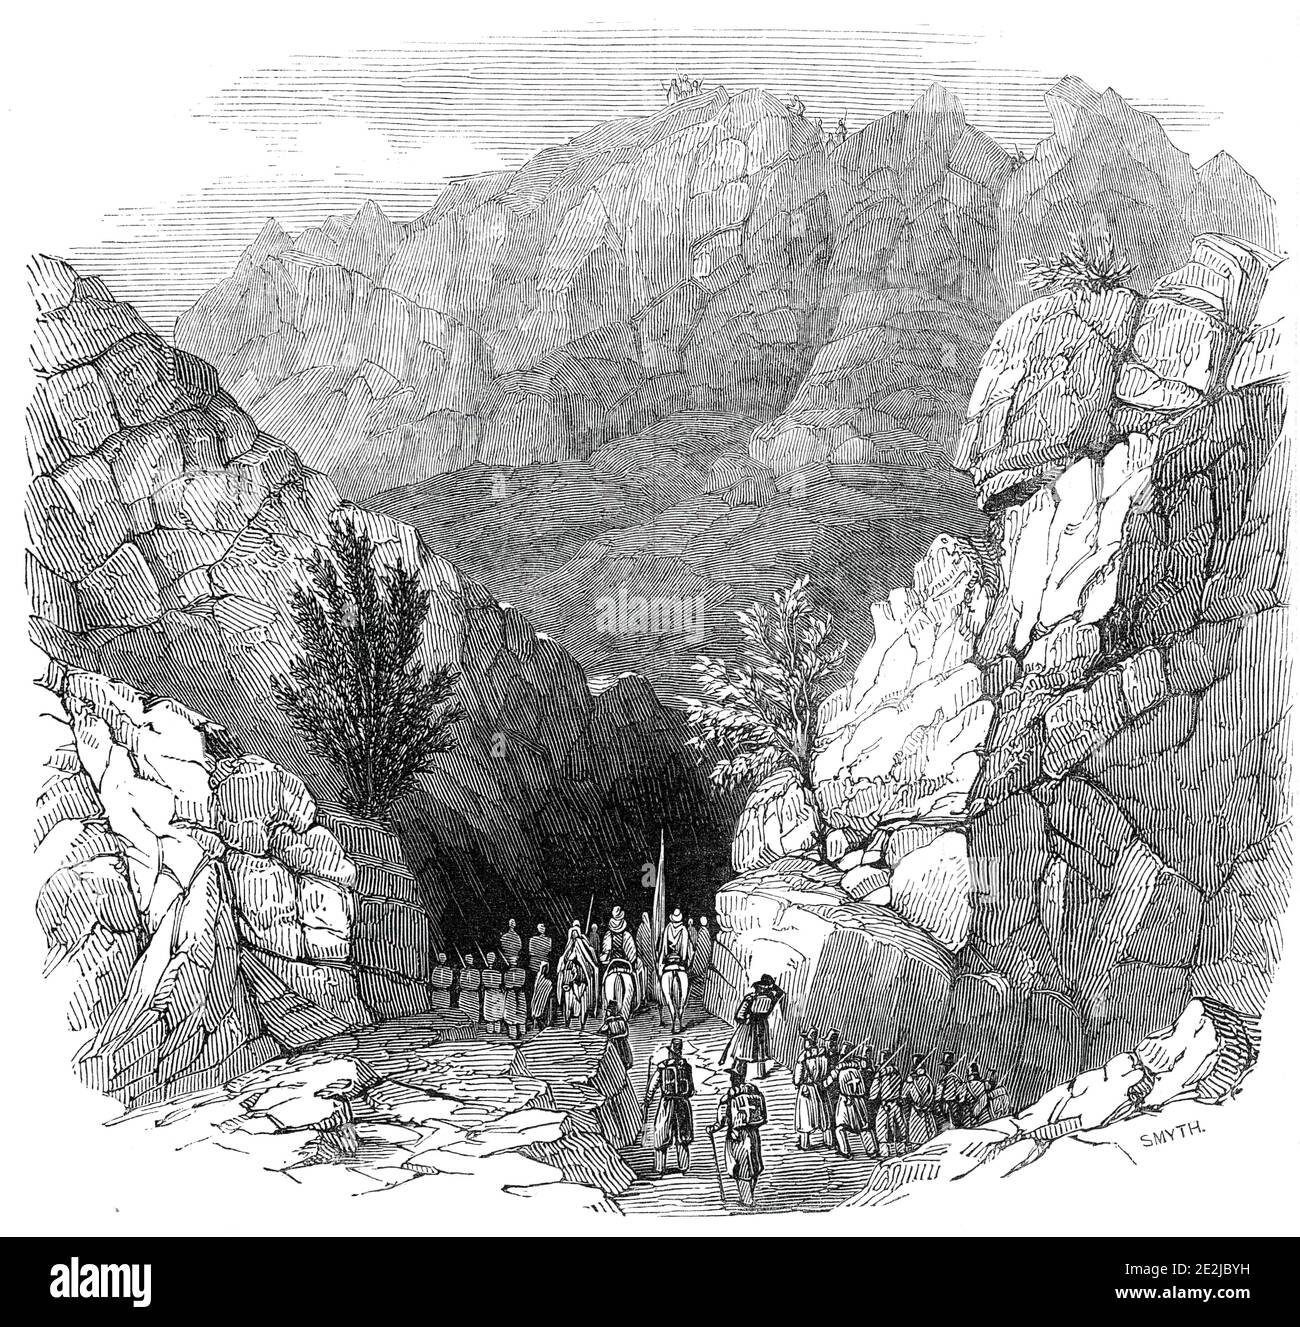 Algeria - passage of the Iron Gates, 1845. French colonialism in North Africa: '...an illustration of the Warfare in Algeria; with, glimpse of its Mountain Scenery; copied from a painting by a celebrated French artist...Various official despatches...clearly show that the subjection of the hostile tribes is not a very easy task...a despatch from Marshal Bugeaud...gives an account of his march in the mountains of the Matmatas, in search of the absconding tribes, and his endeavours to punish the mountaineers, who had taken part in the revolt...in several skirmishes...the Arabs offered a vigorous Stock Photo